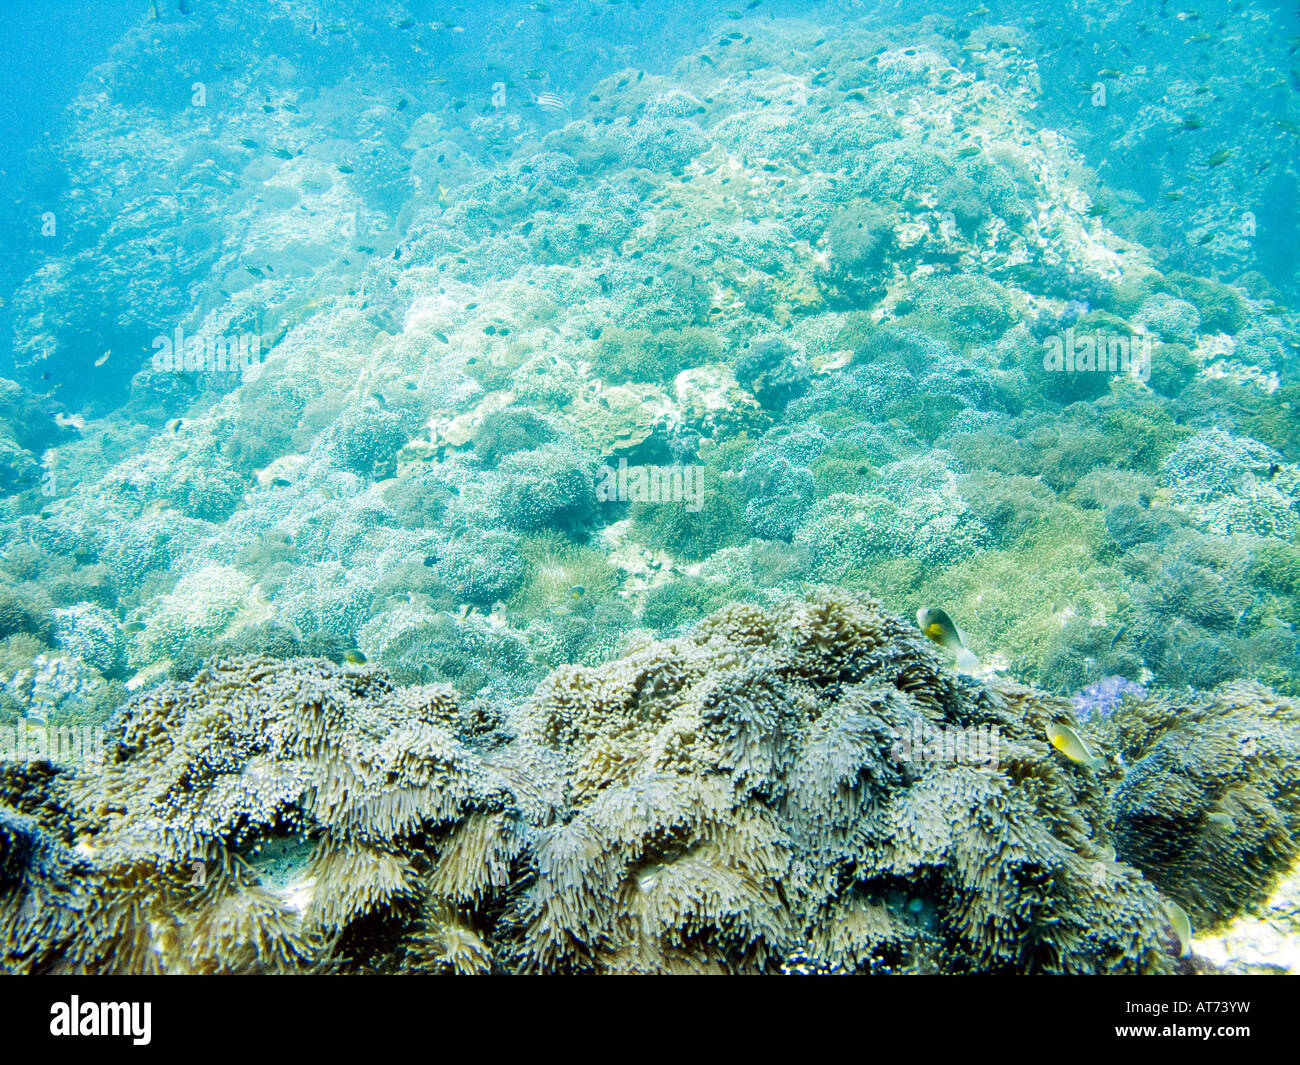 Underwater landscape with anemones in the foreground February 3 2008, Surin islands, Andaman sea, Thailand Stock Photo